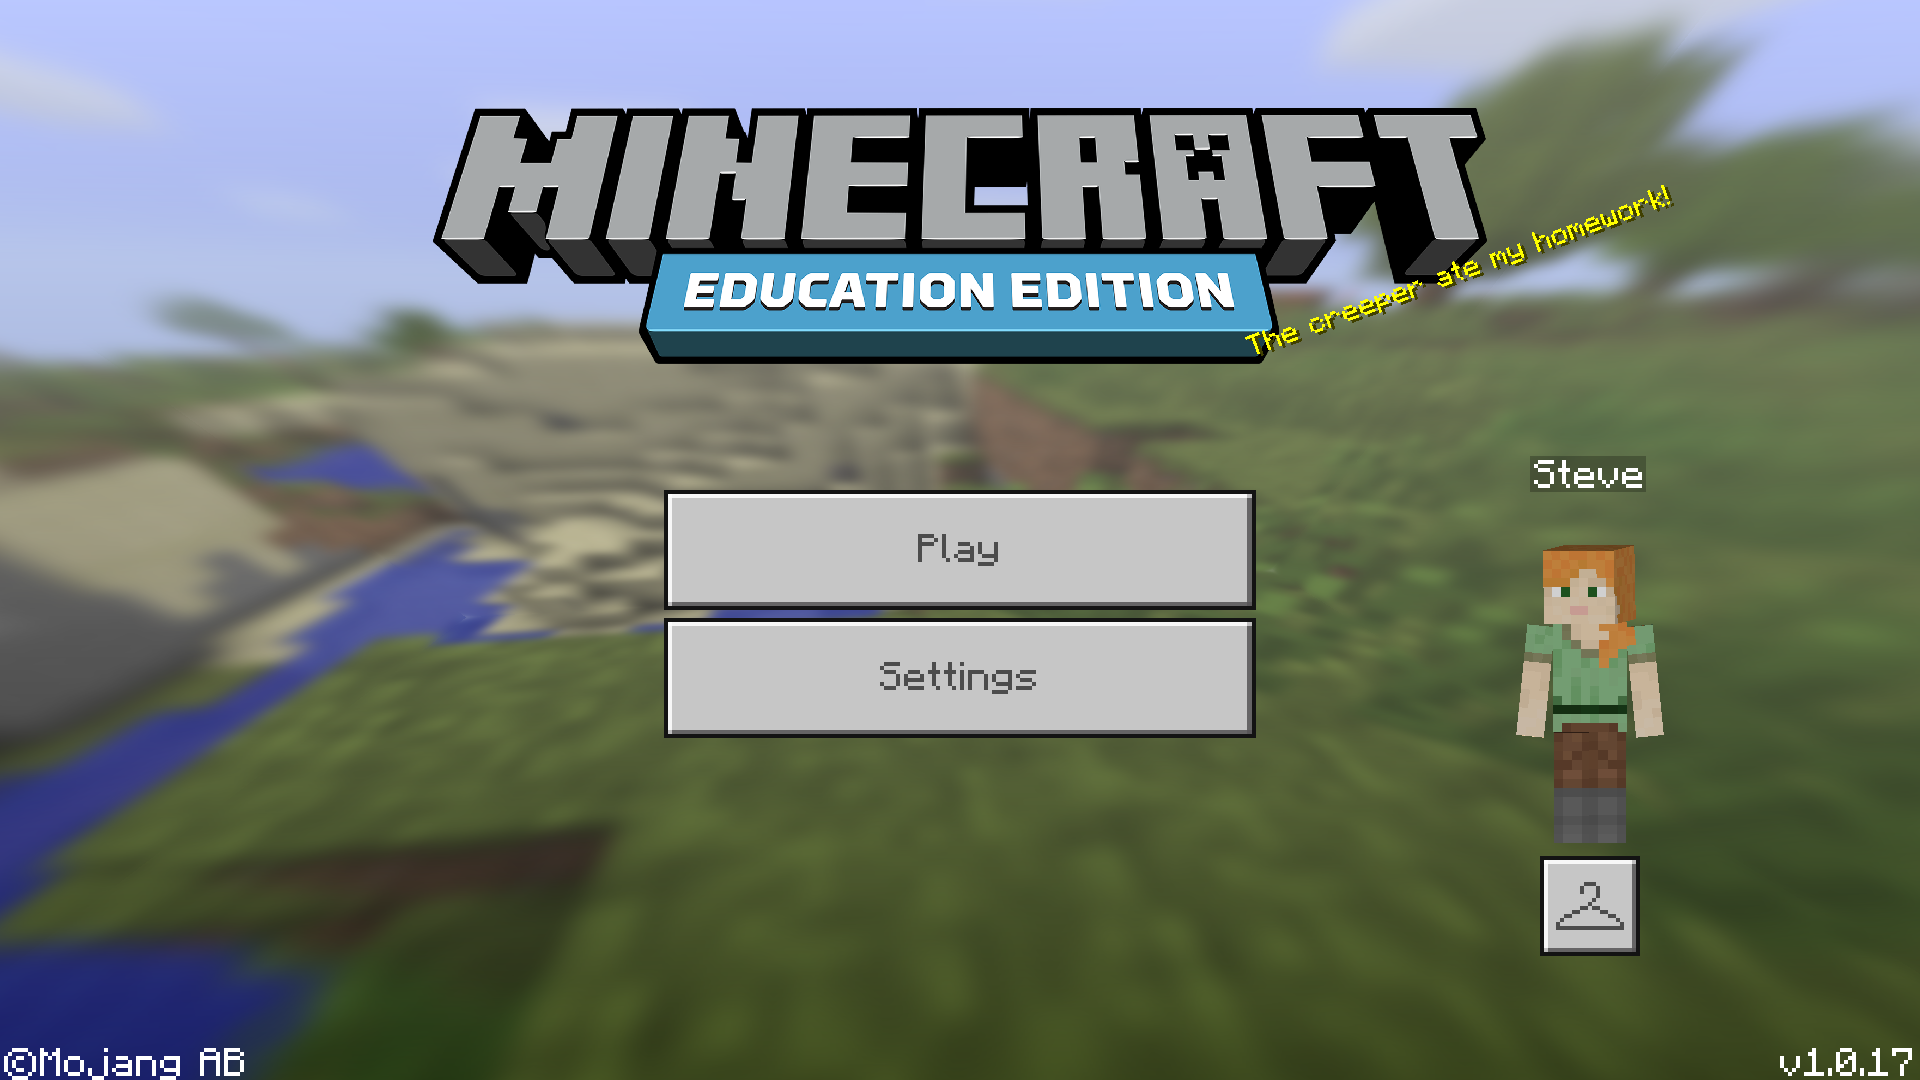 Why not to buy Minecraft Education Edition